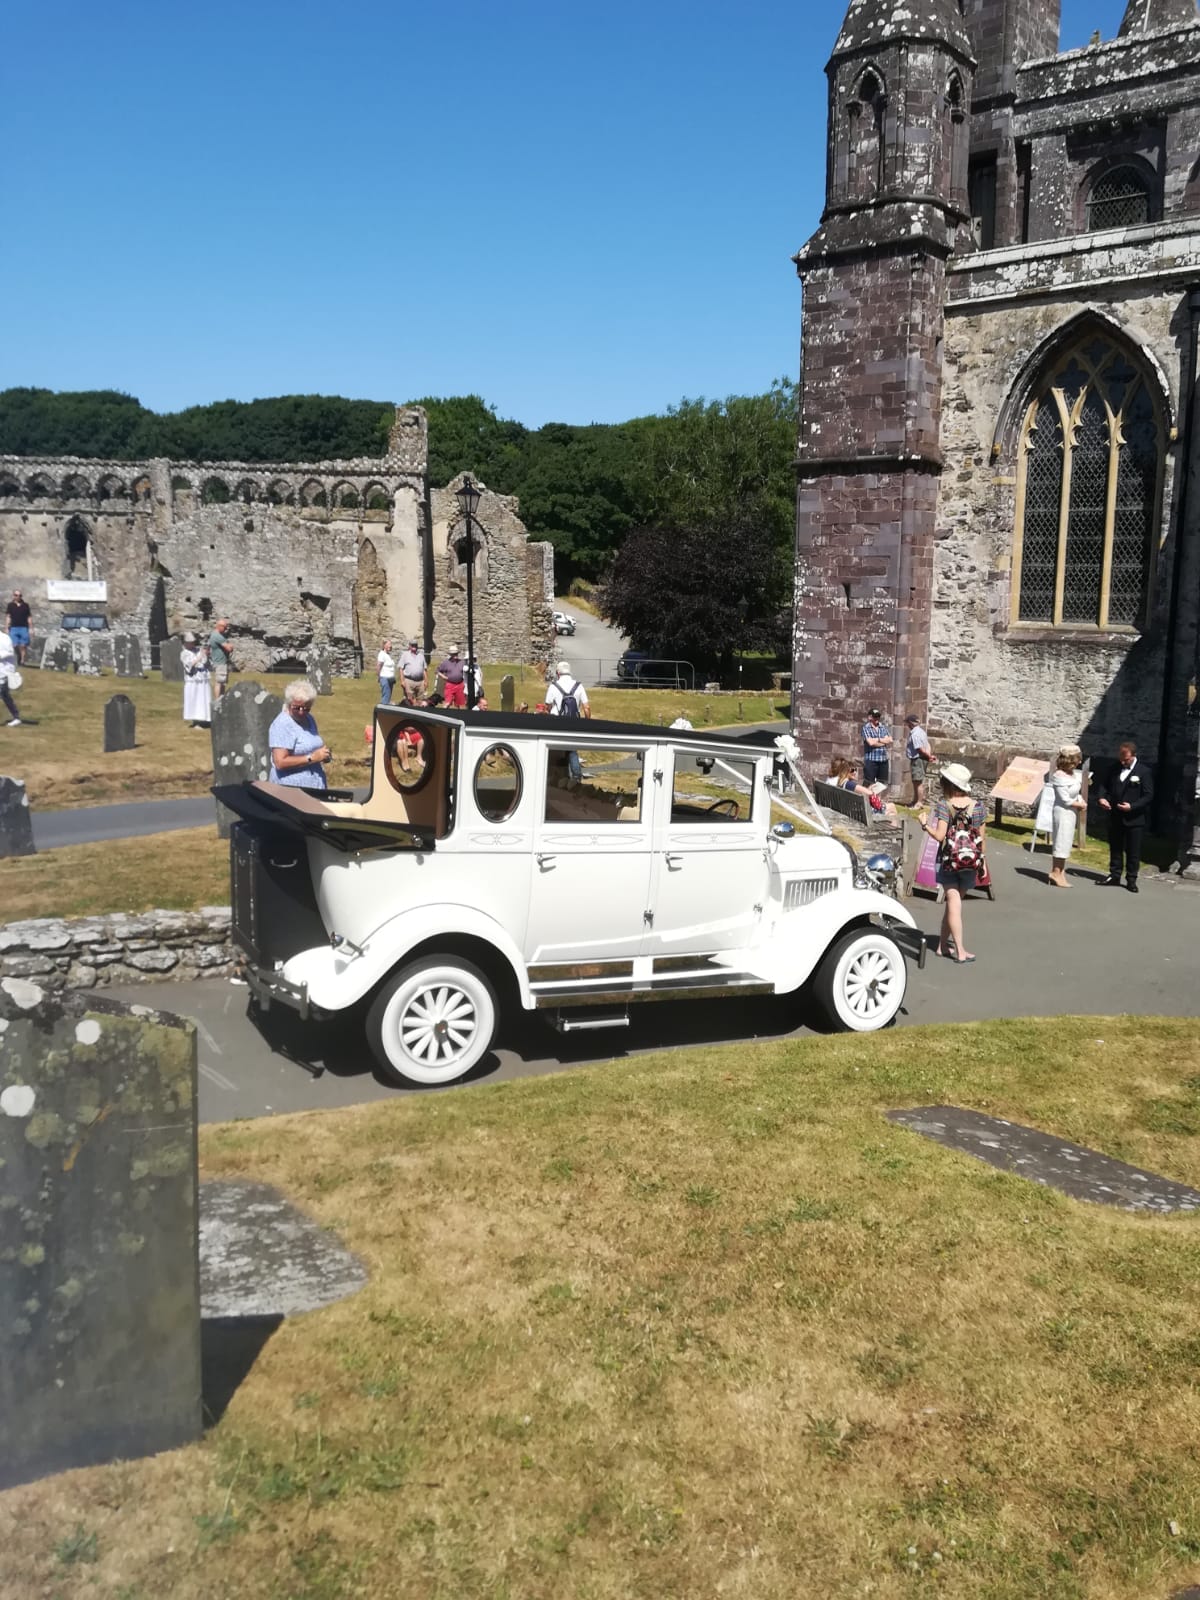 Elin and Michael at St David's Cathedral